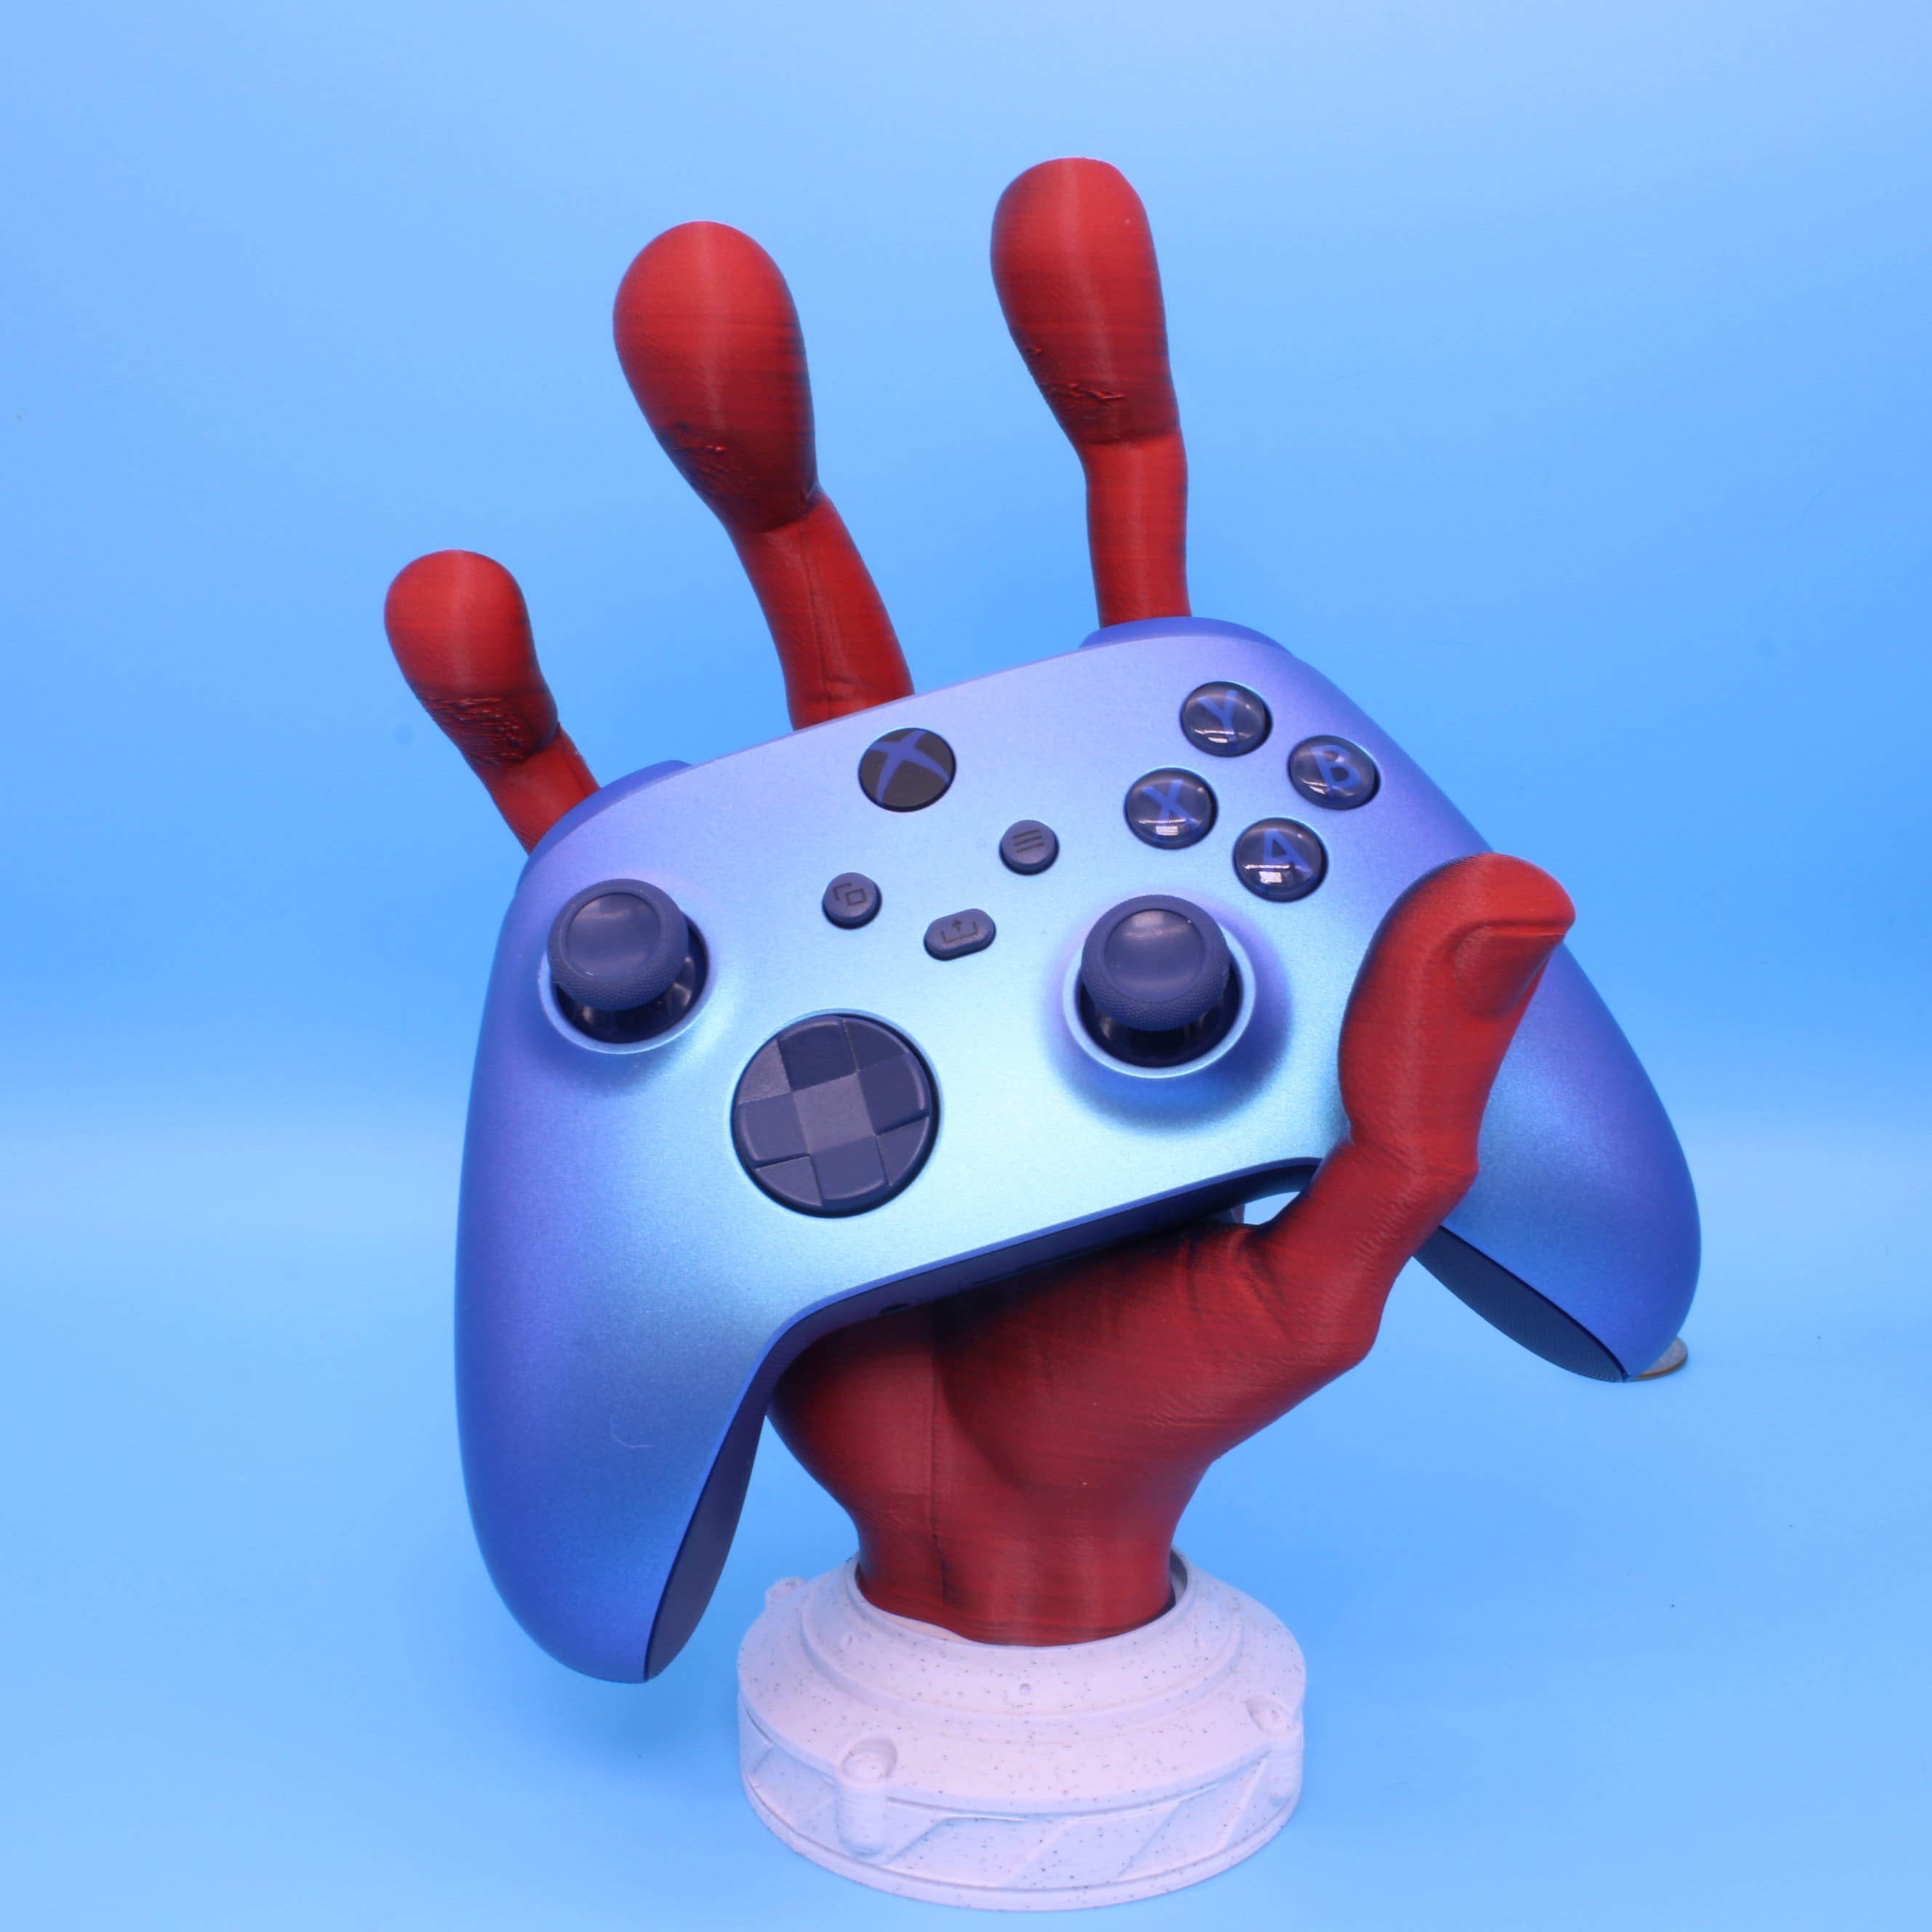 Game Controller Holder - 4 Finger Alien Hand. Over 100 Colors Available.